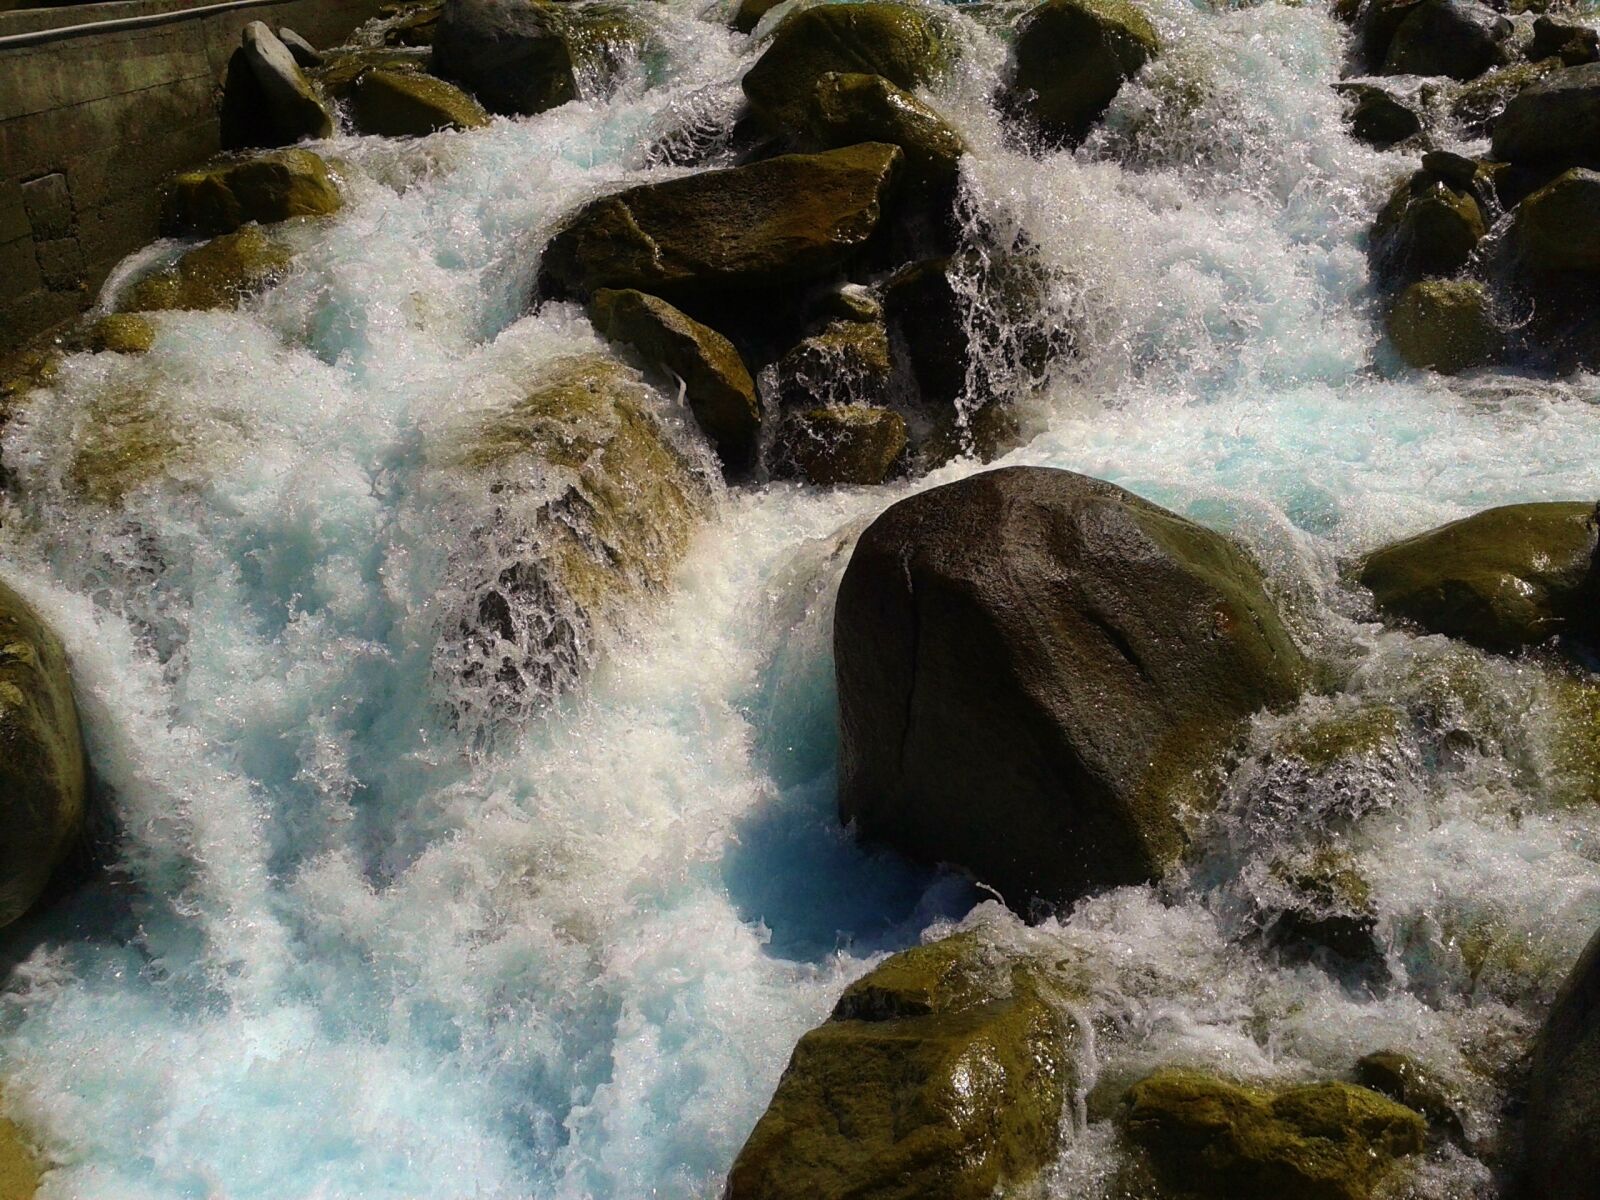 Samsung Galaxy Fame sample photo. Water, stone, nature photography